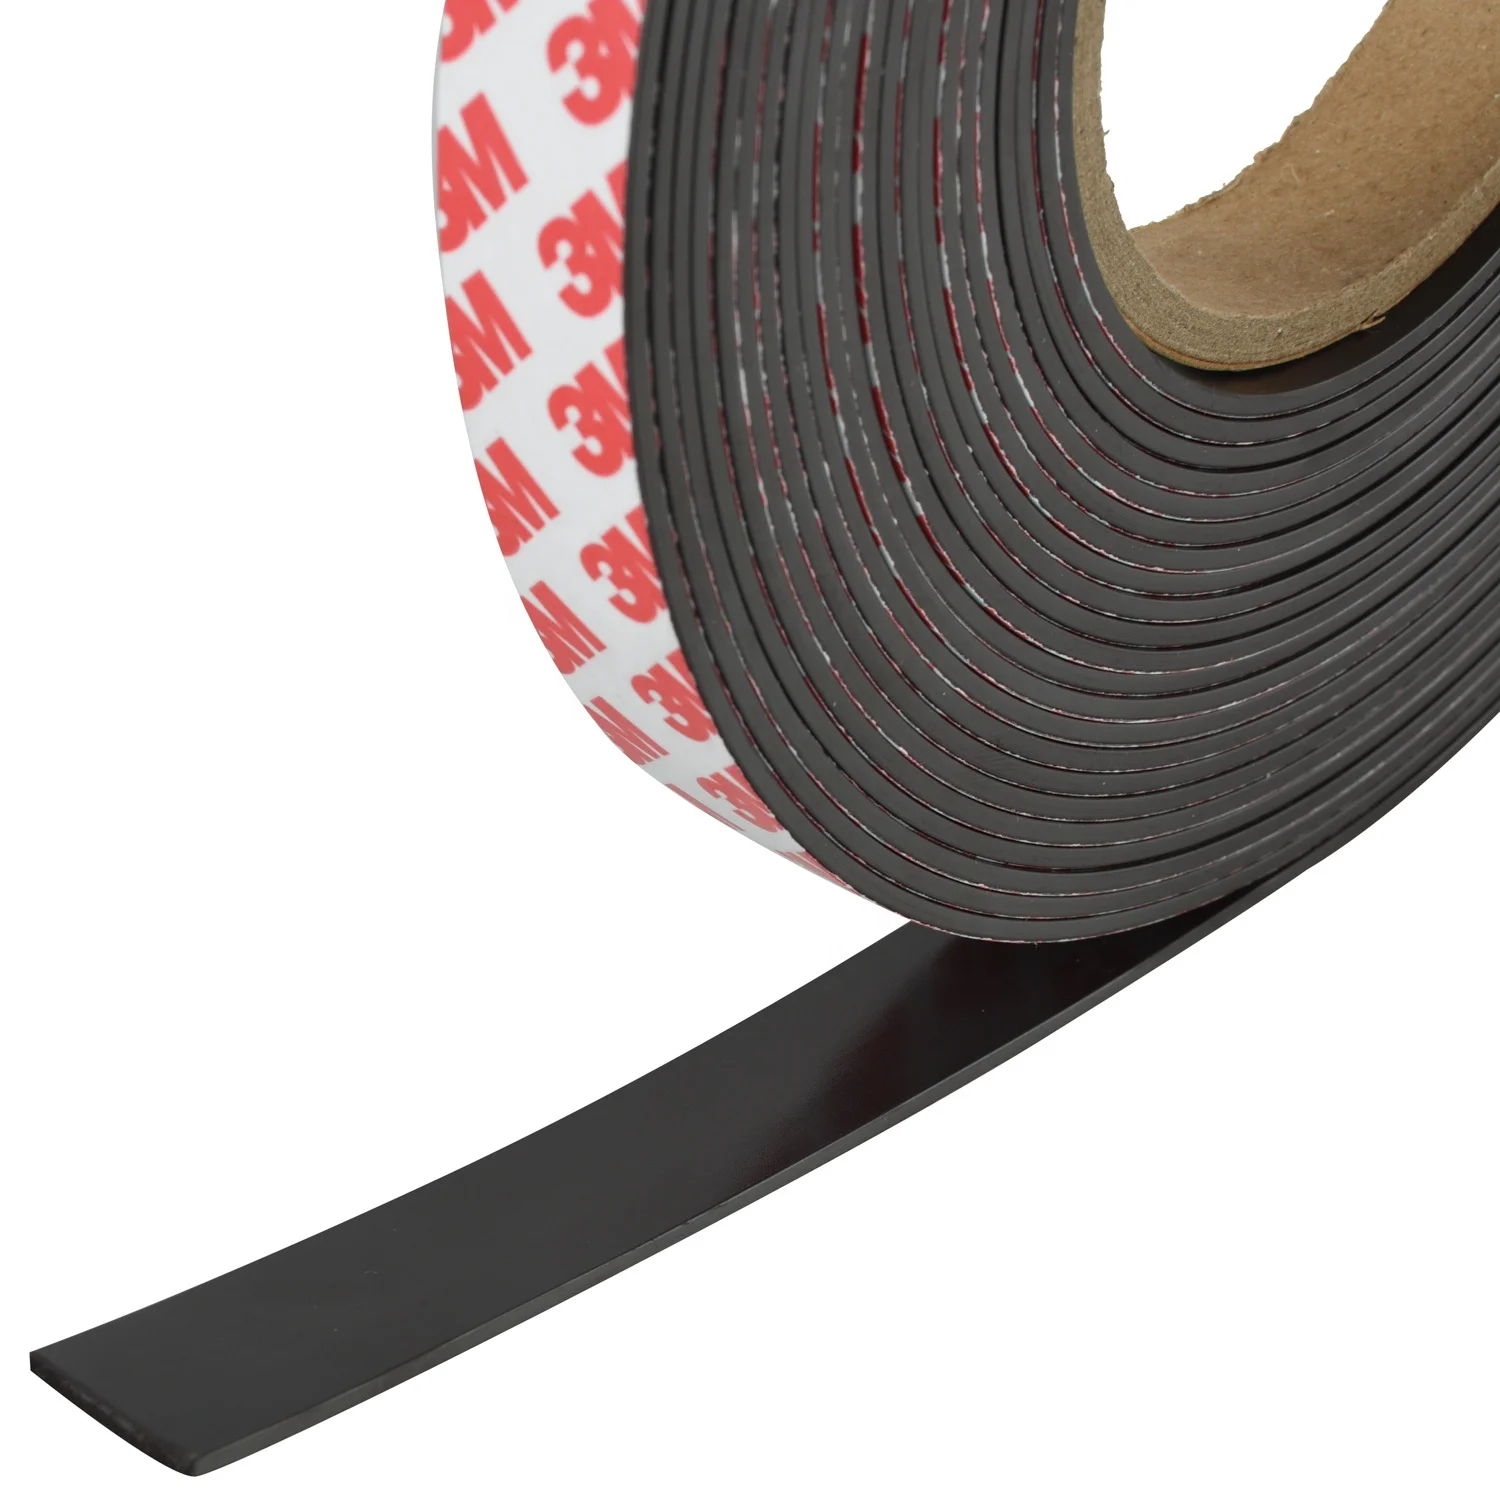 3M Flexible Magnetic Tape Rubber Magnetic Stripe Tape With Strong Self Adhesive